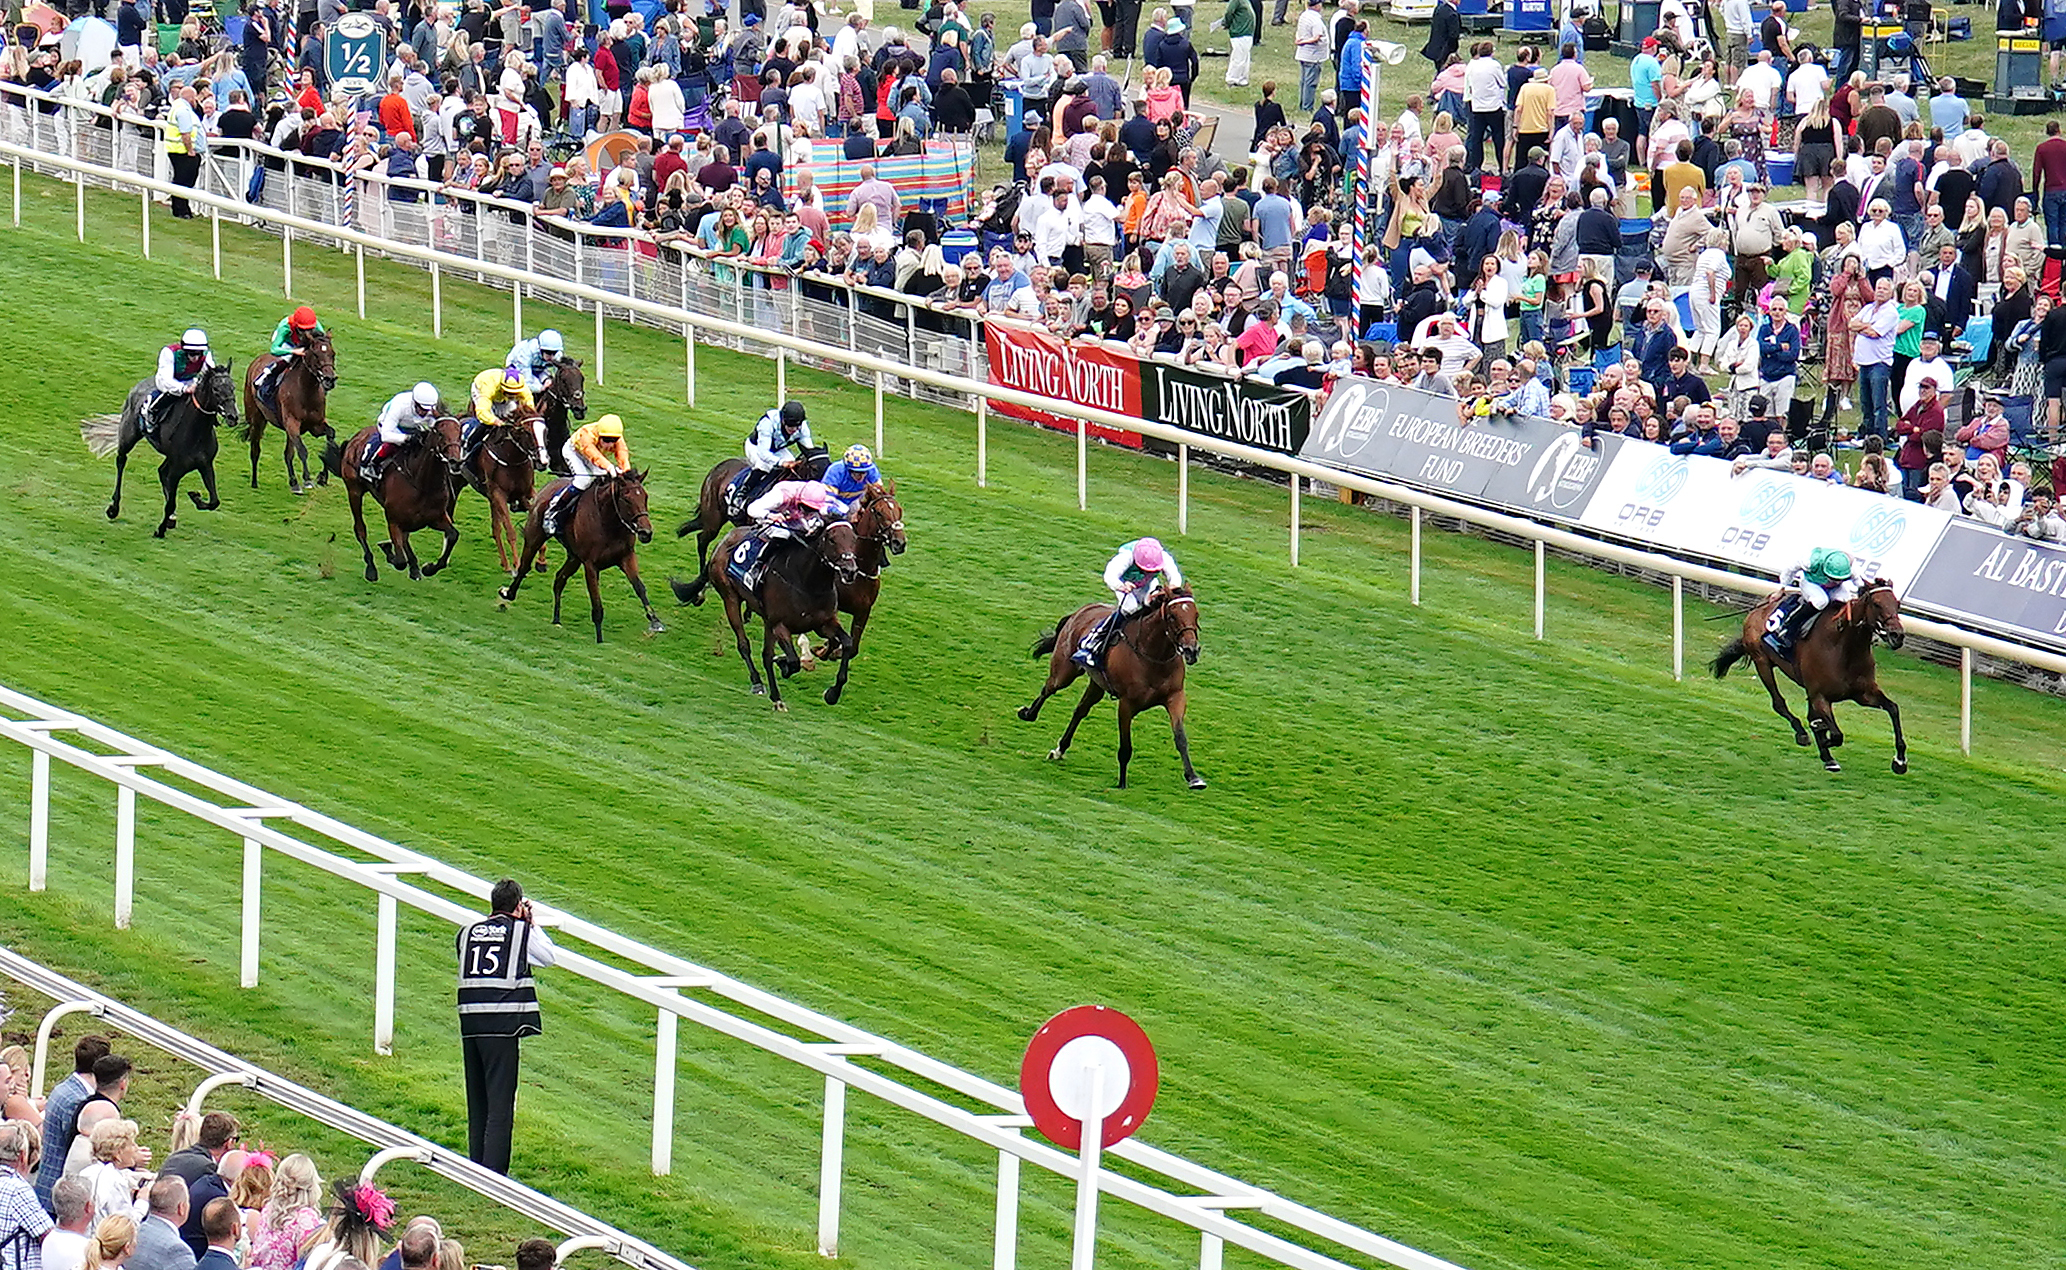 Haskoy (right) just got the better of fellow Juddmonte-owned filly Time Lock at York